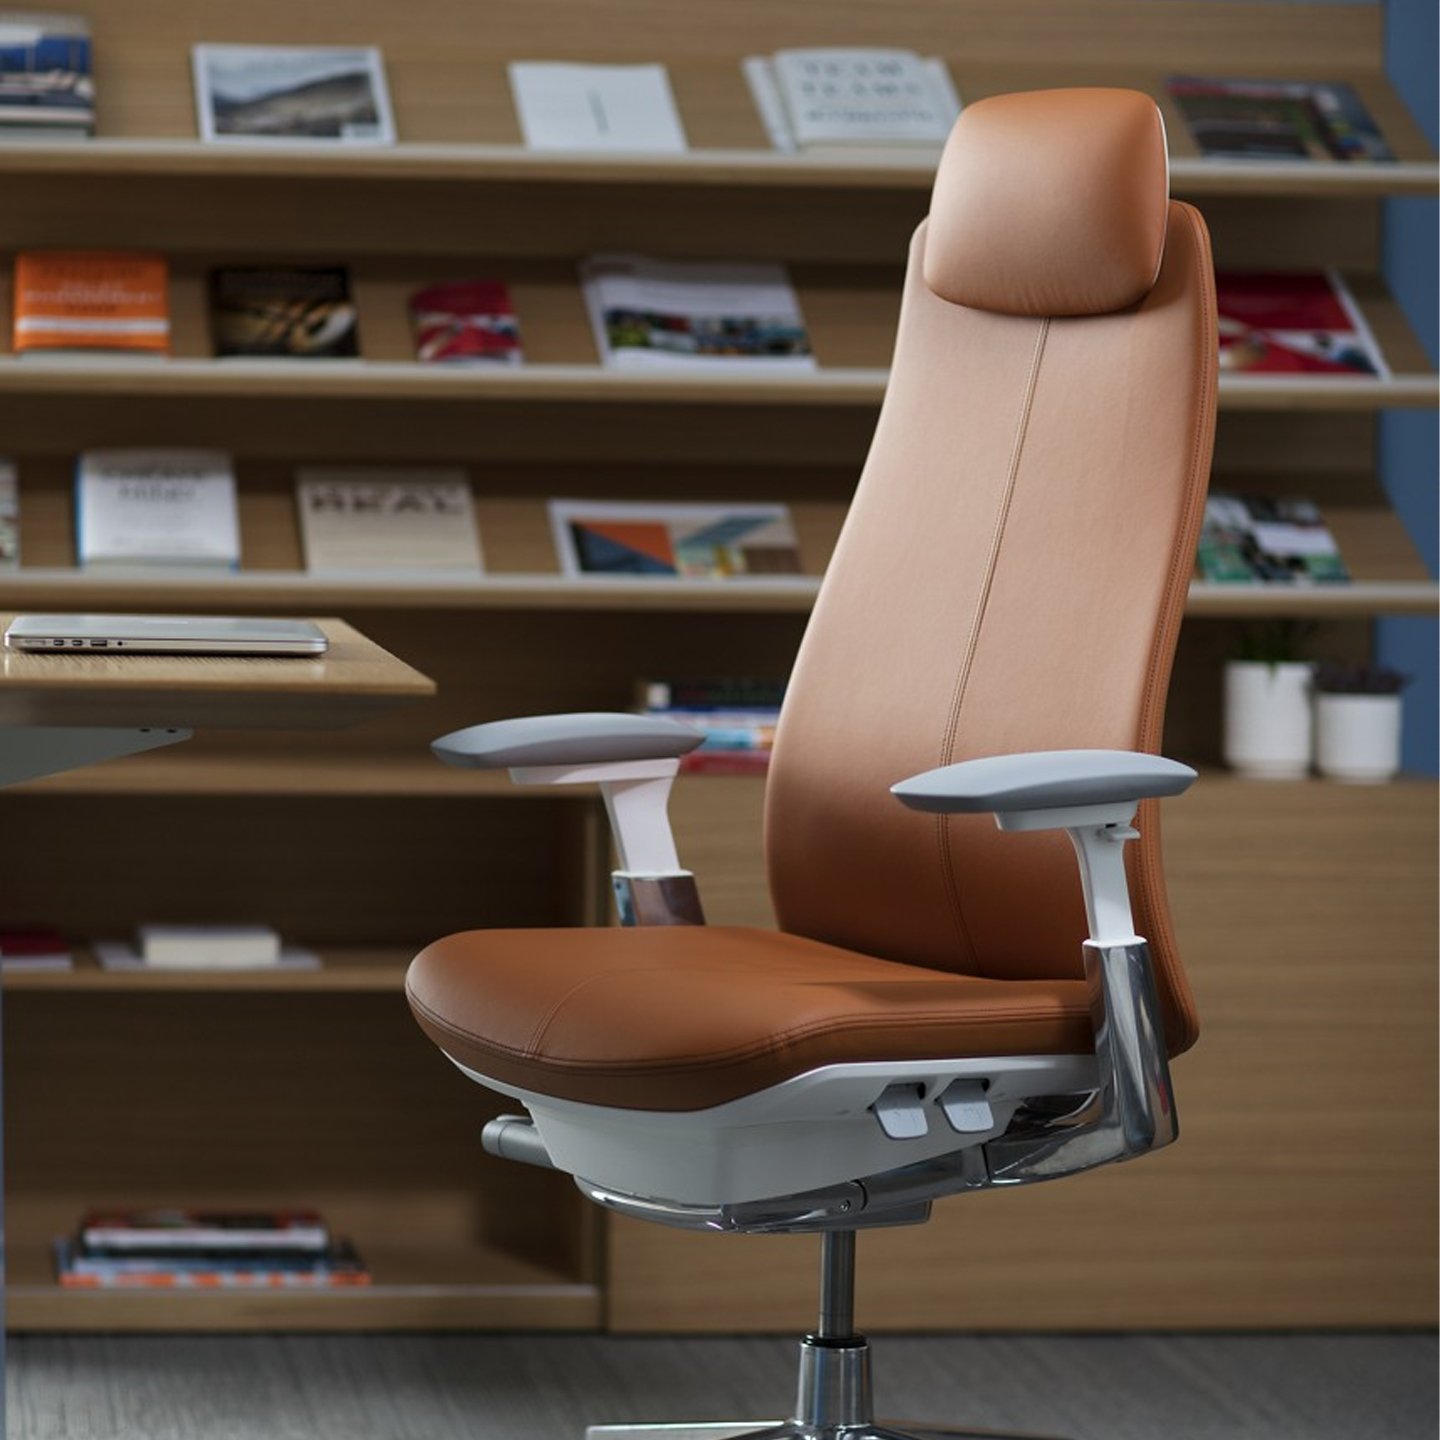 Haworth Fern Executive Task chair in brown leather in a office room